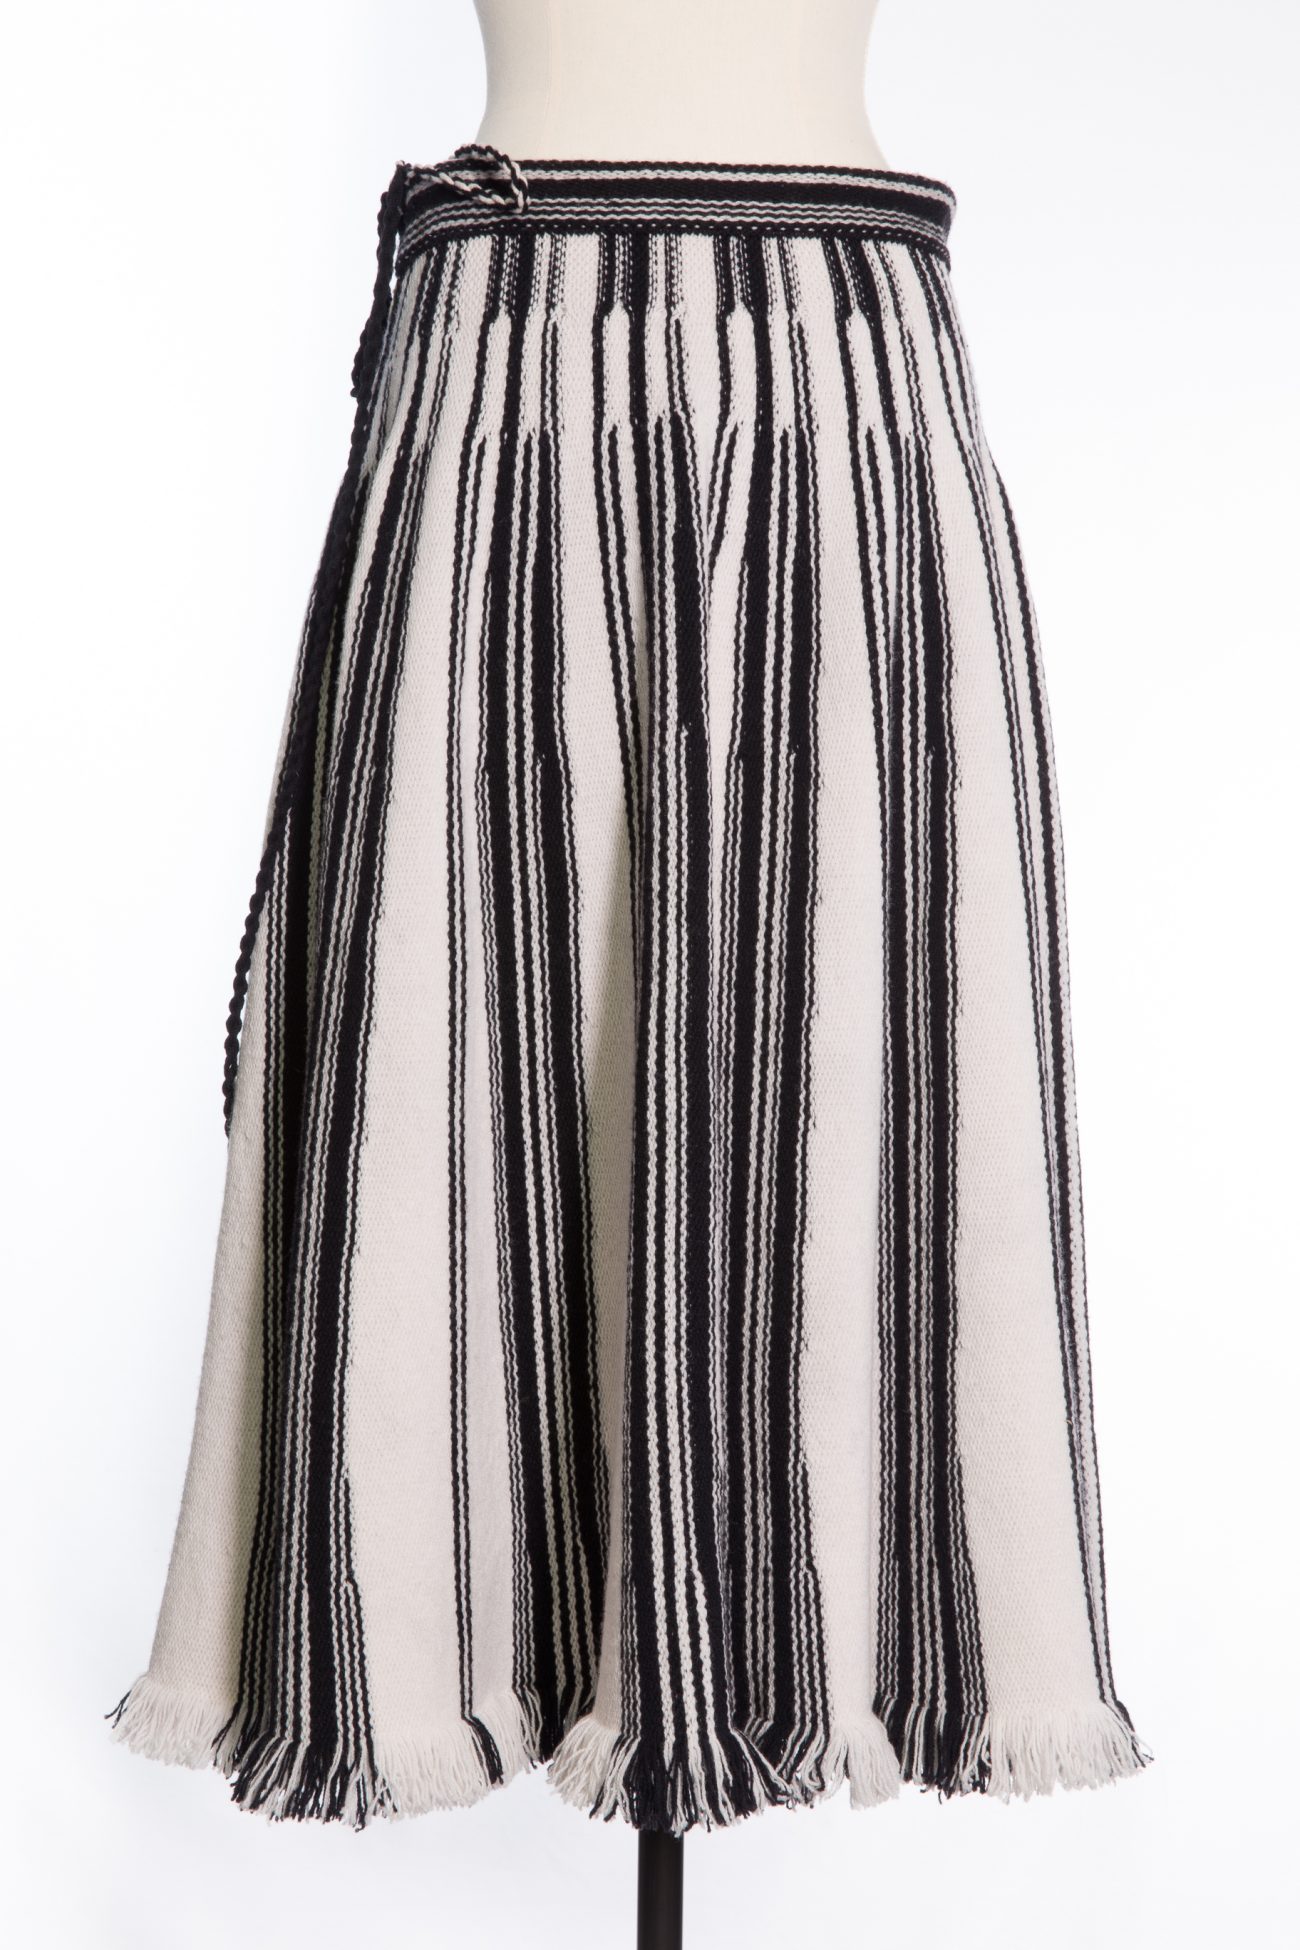 christian dior striped black and white wool skirt